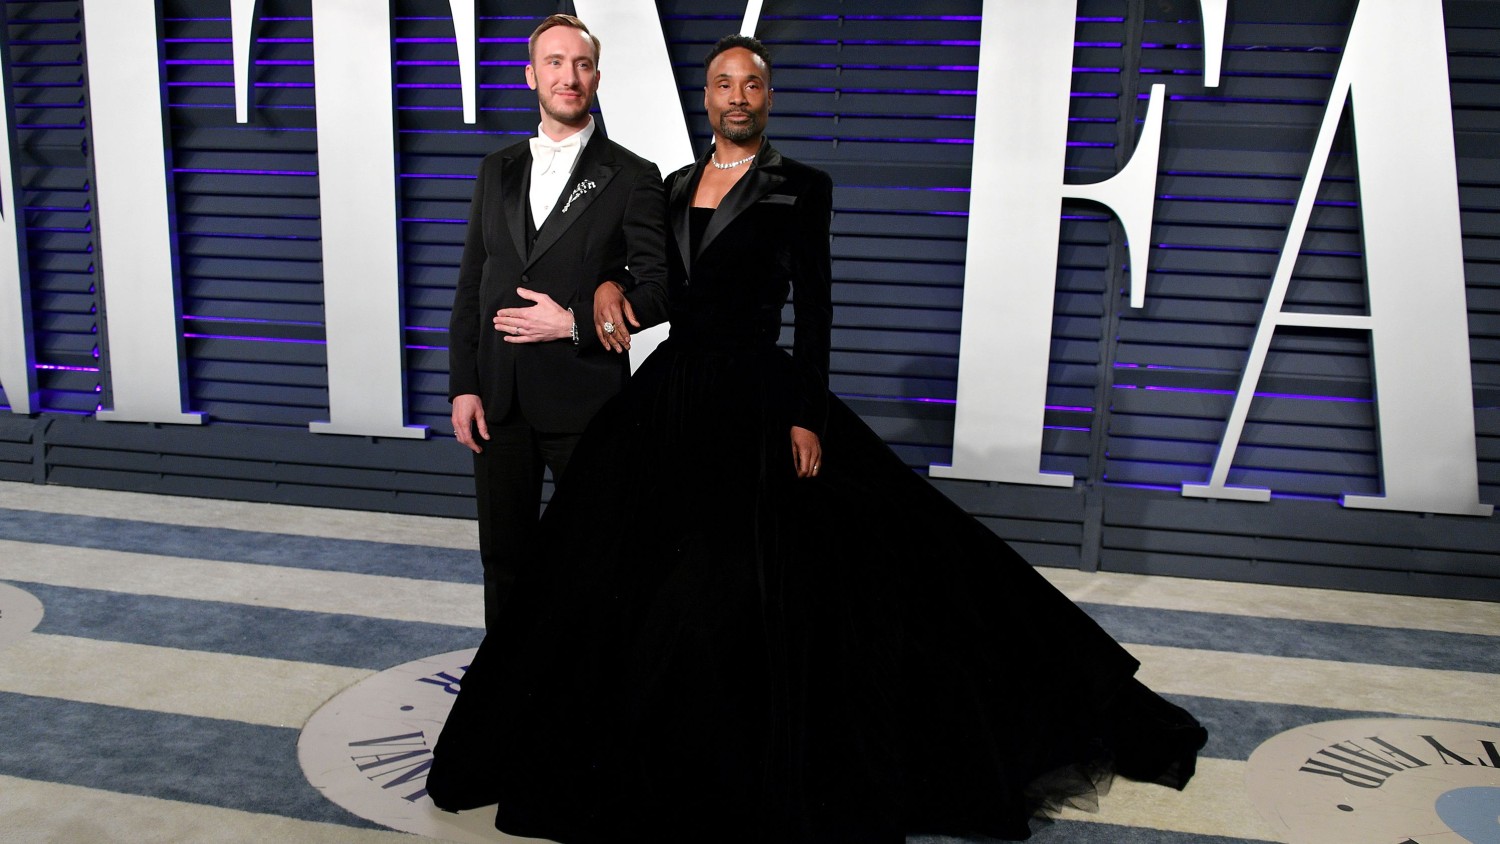 Dia Dipasupil/Getty Images | Adam Smith (L) and Billy Porter attend the 2019 Vanity Fair Oscar Party hosted by Radhika Jones at Wallis Annenberg Center for the Performing Arts on February 24, 2019 in Beverly Hills, California.